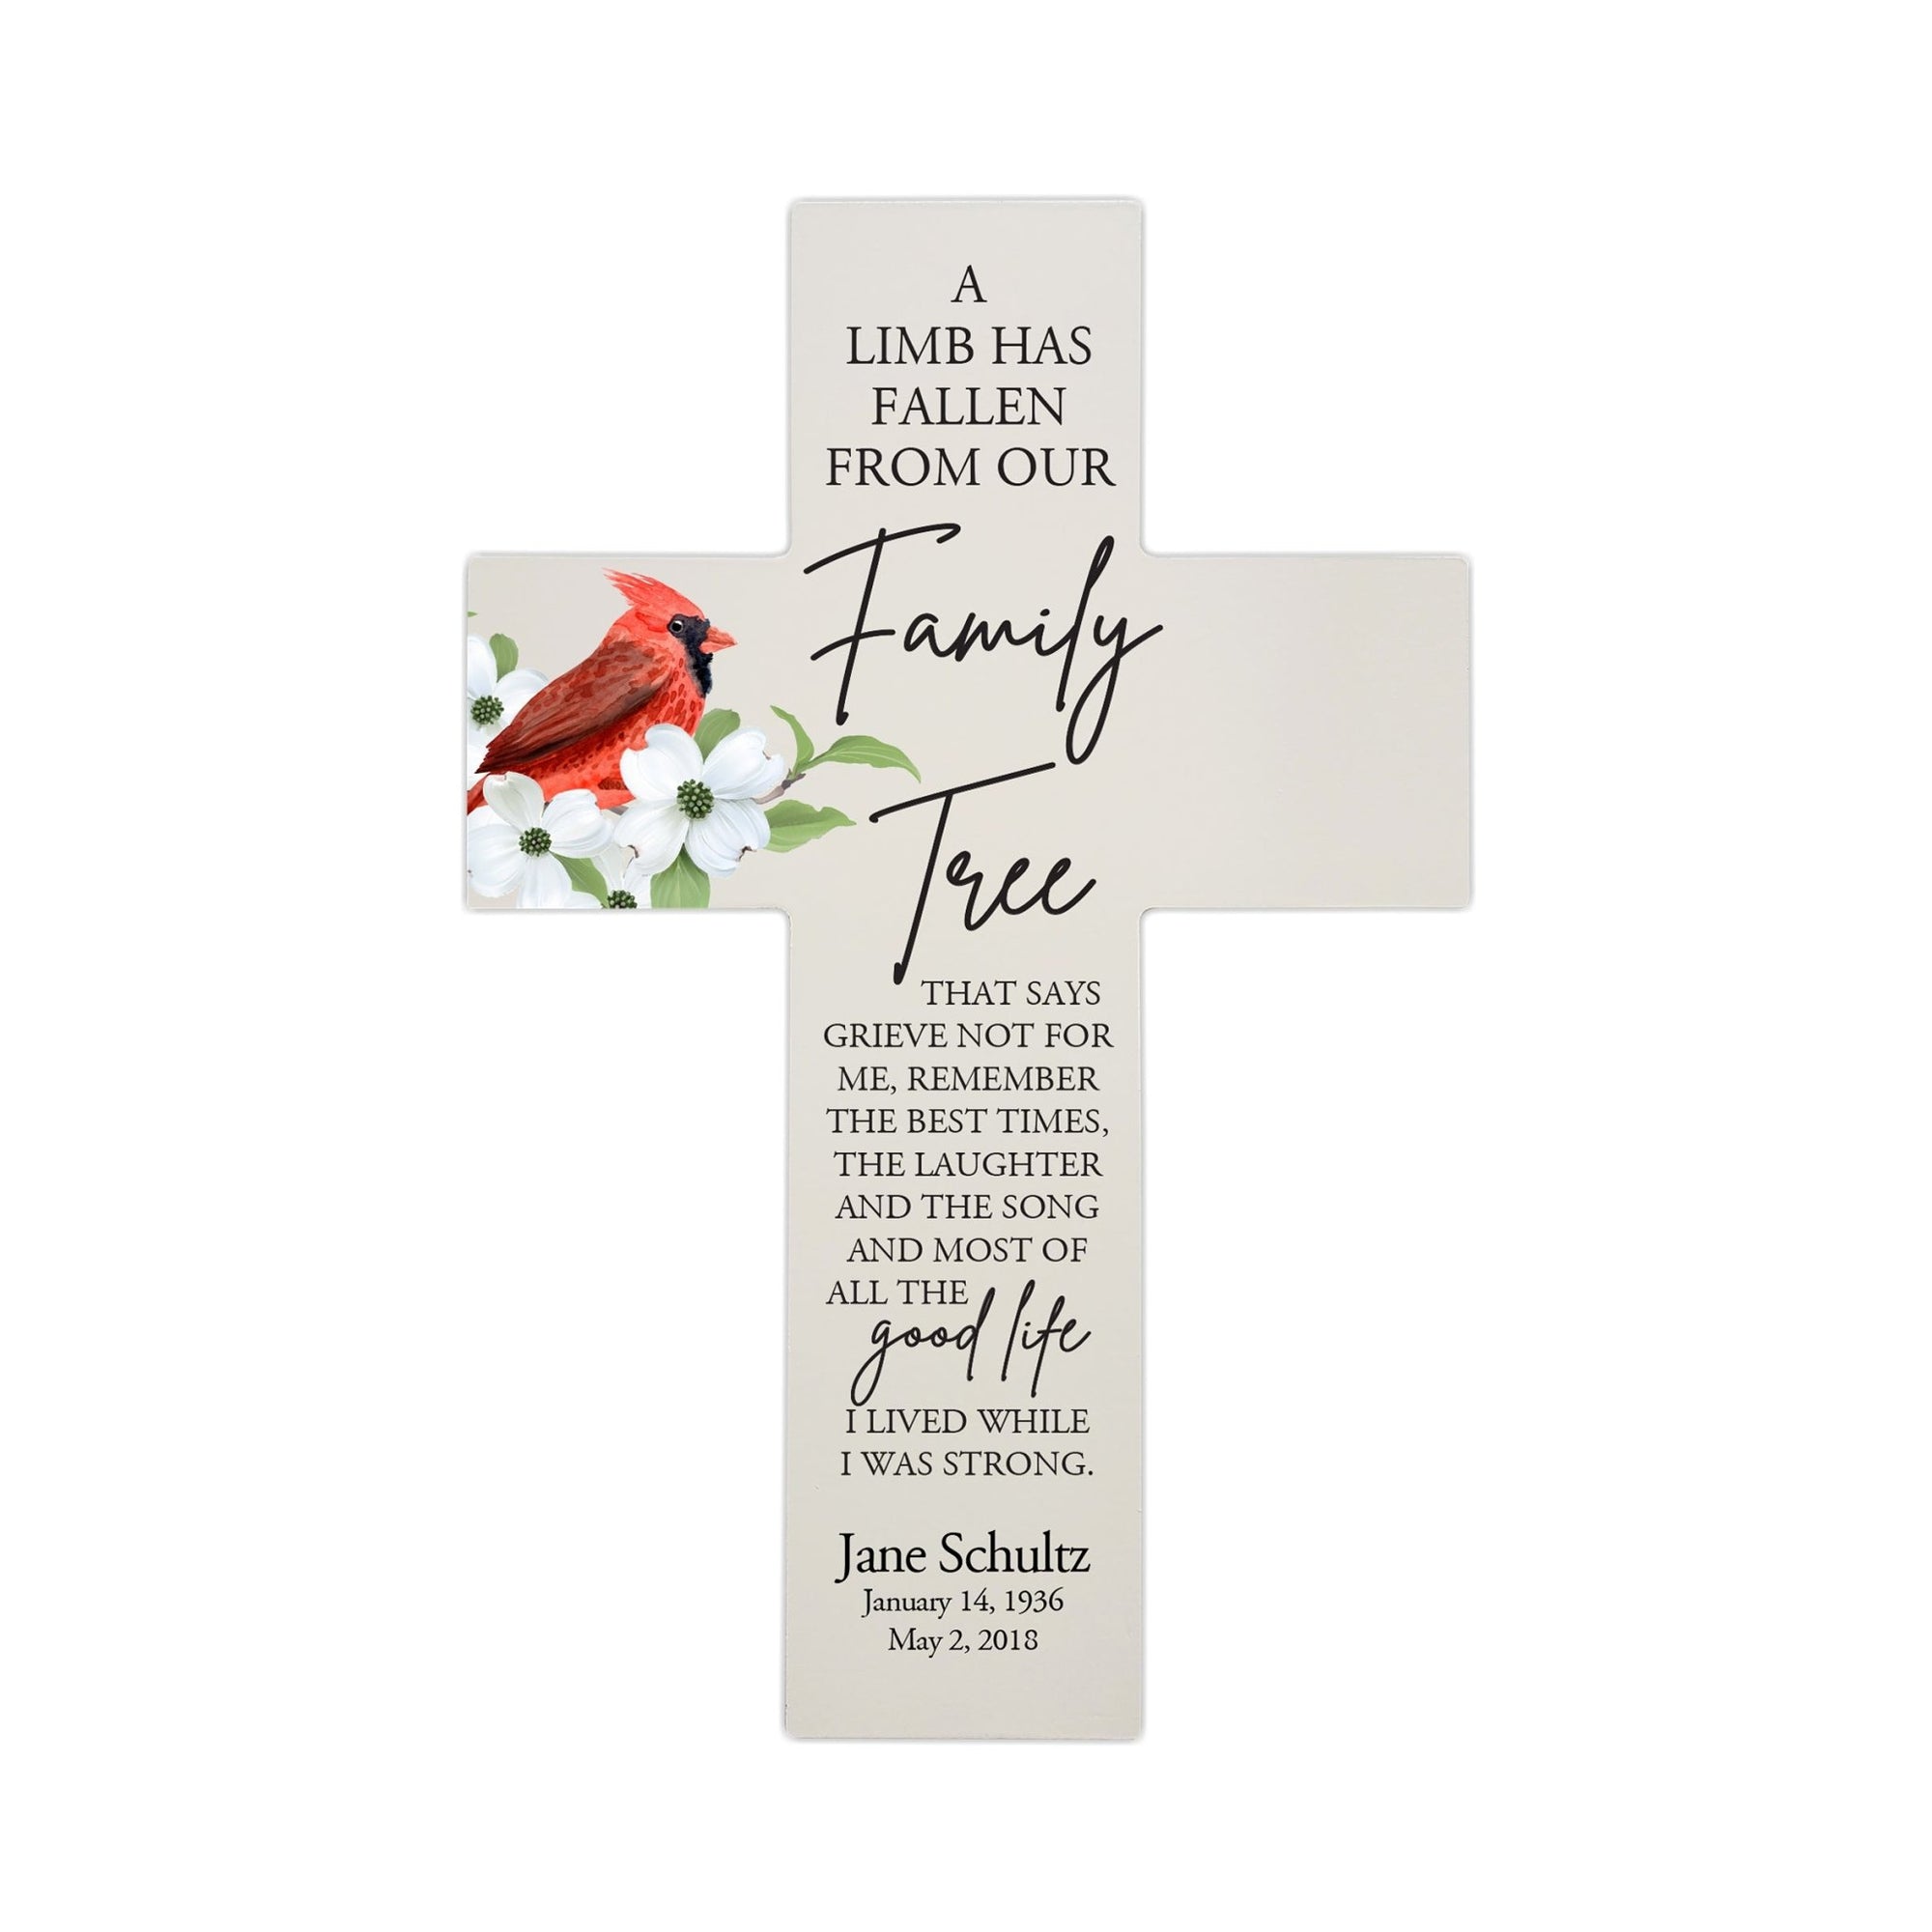 Personalized Red Cardinal Memorial Bereavement Wall Cross For Loss of Loved One A Limb Has Fallen (Cardinal) Quote 14 x 9.25 A Limb Has Fallen From Our Family Tree - LifeSong Milestones